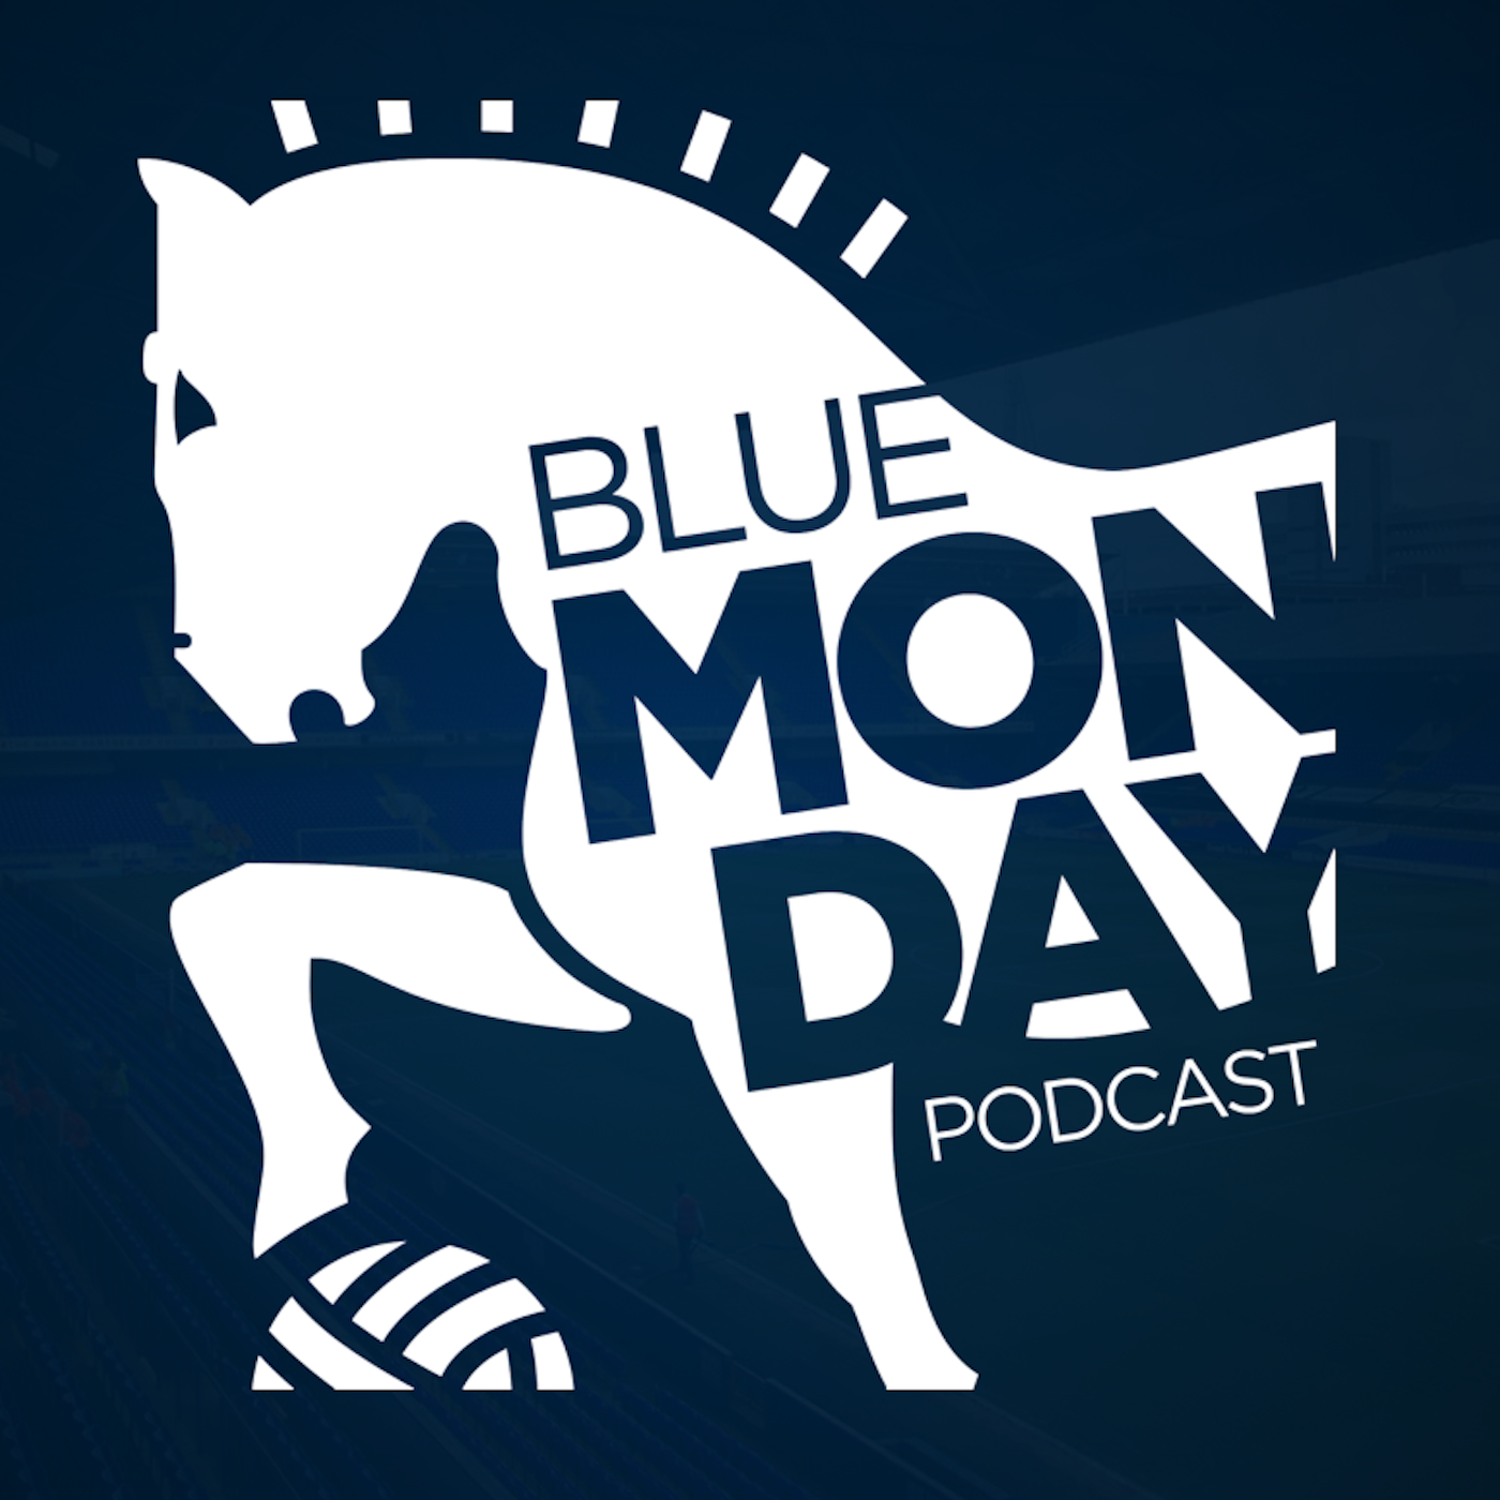 Blue Monday Podcast - Ipswich Town